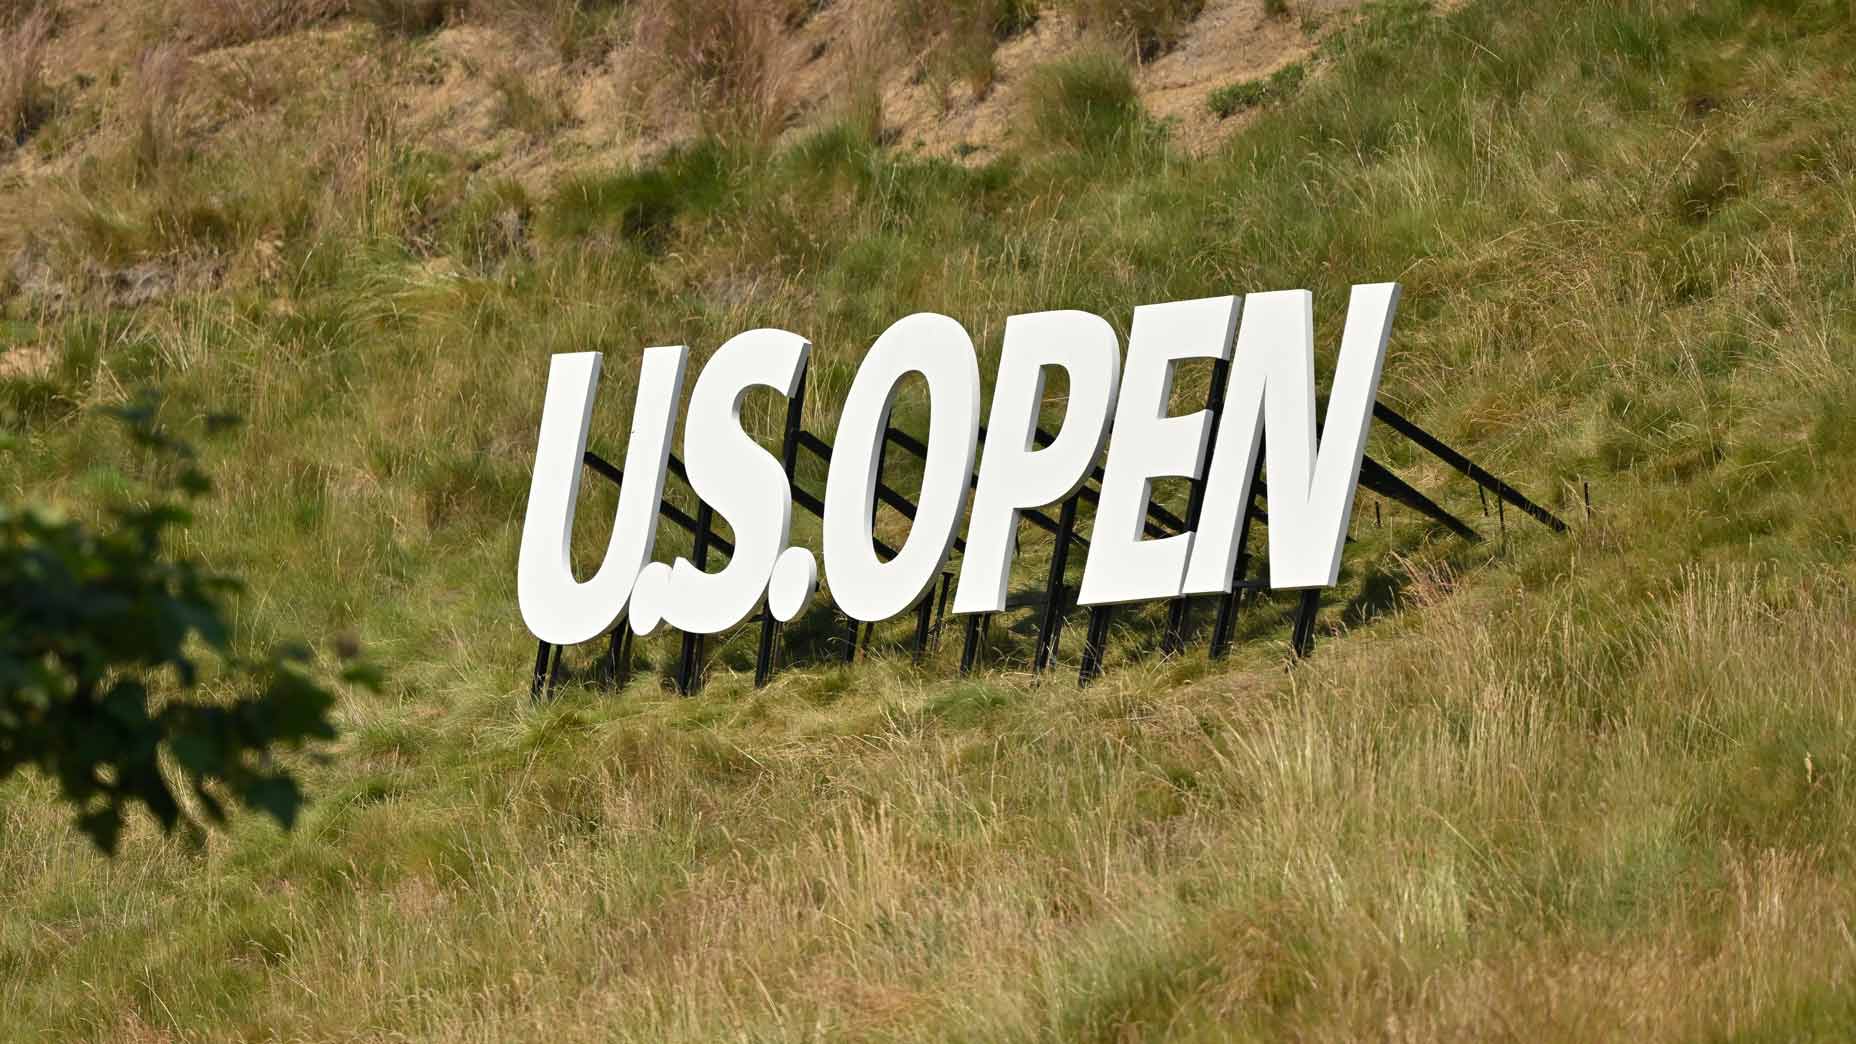 This year's U.S. Open will feature plenty of players who don't win.